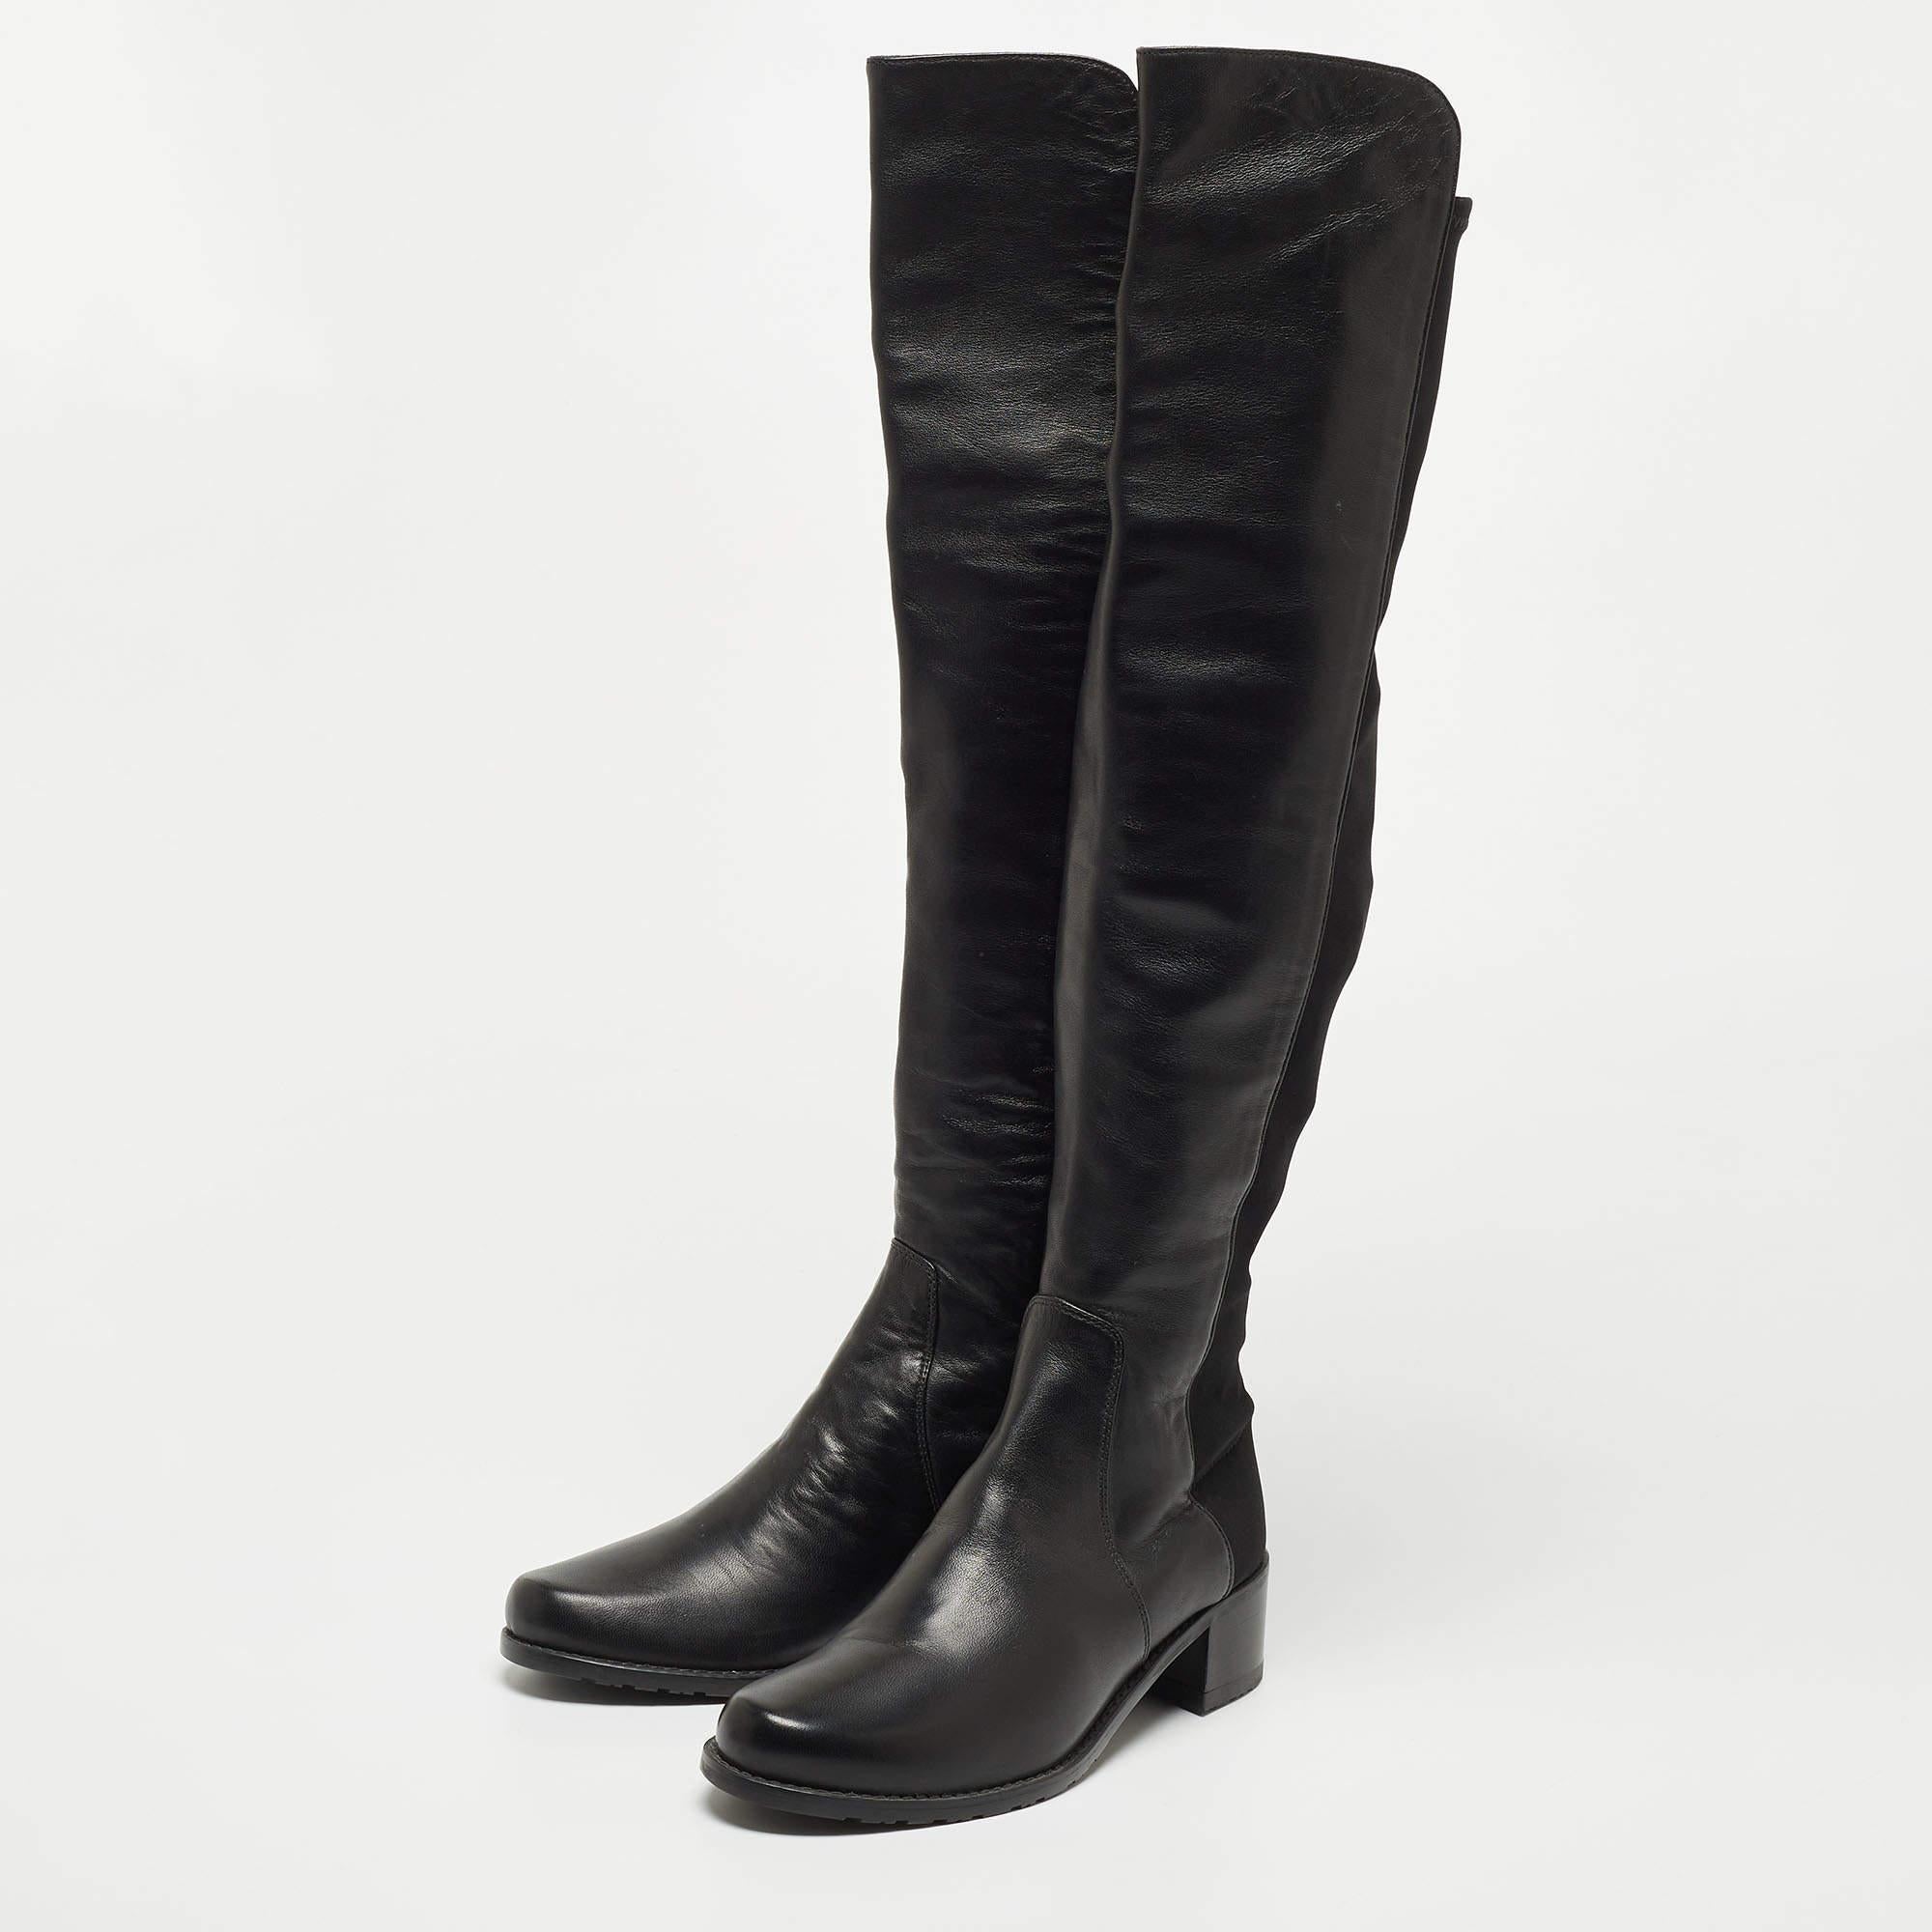 Stuart Weitzman Black Leather and Fabric Thigh High Boot Size 35 1